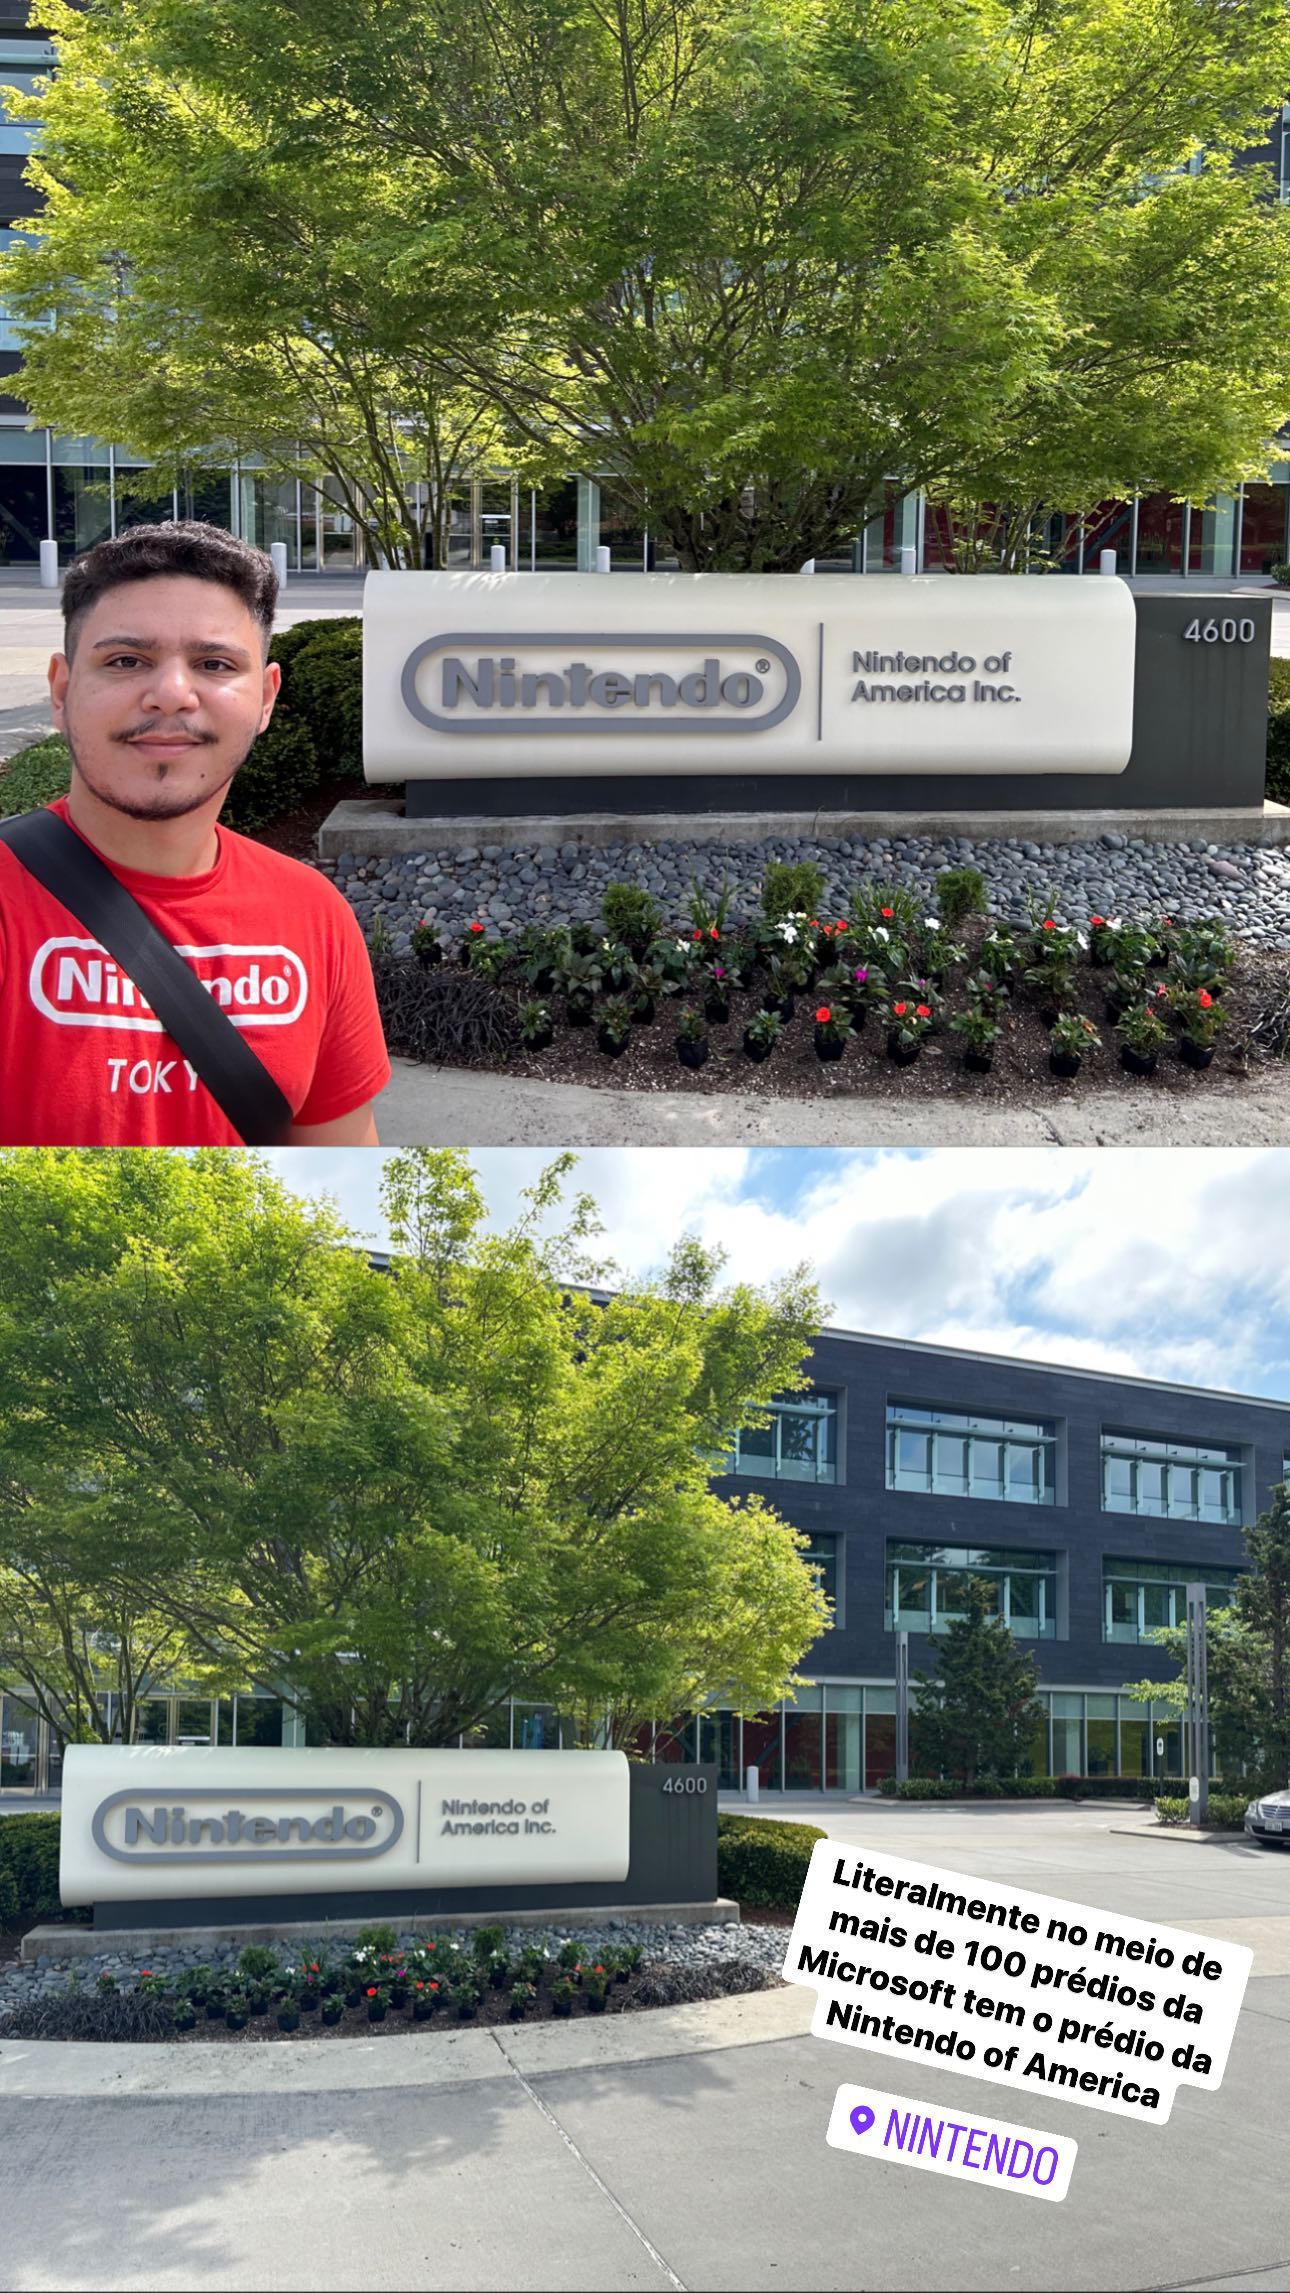 Literally in the middle of more than 100 Microsoft buildings is the Nintendo of America building